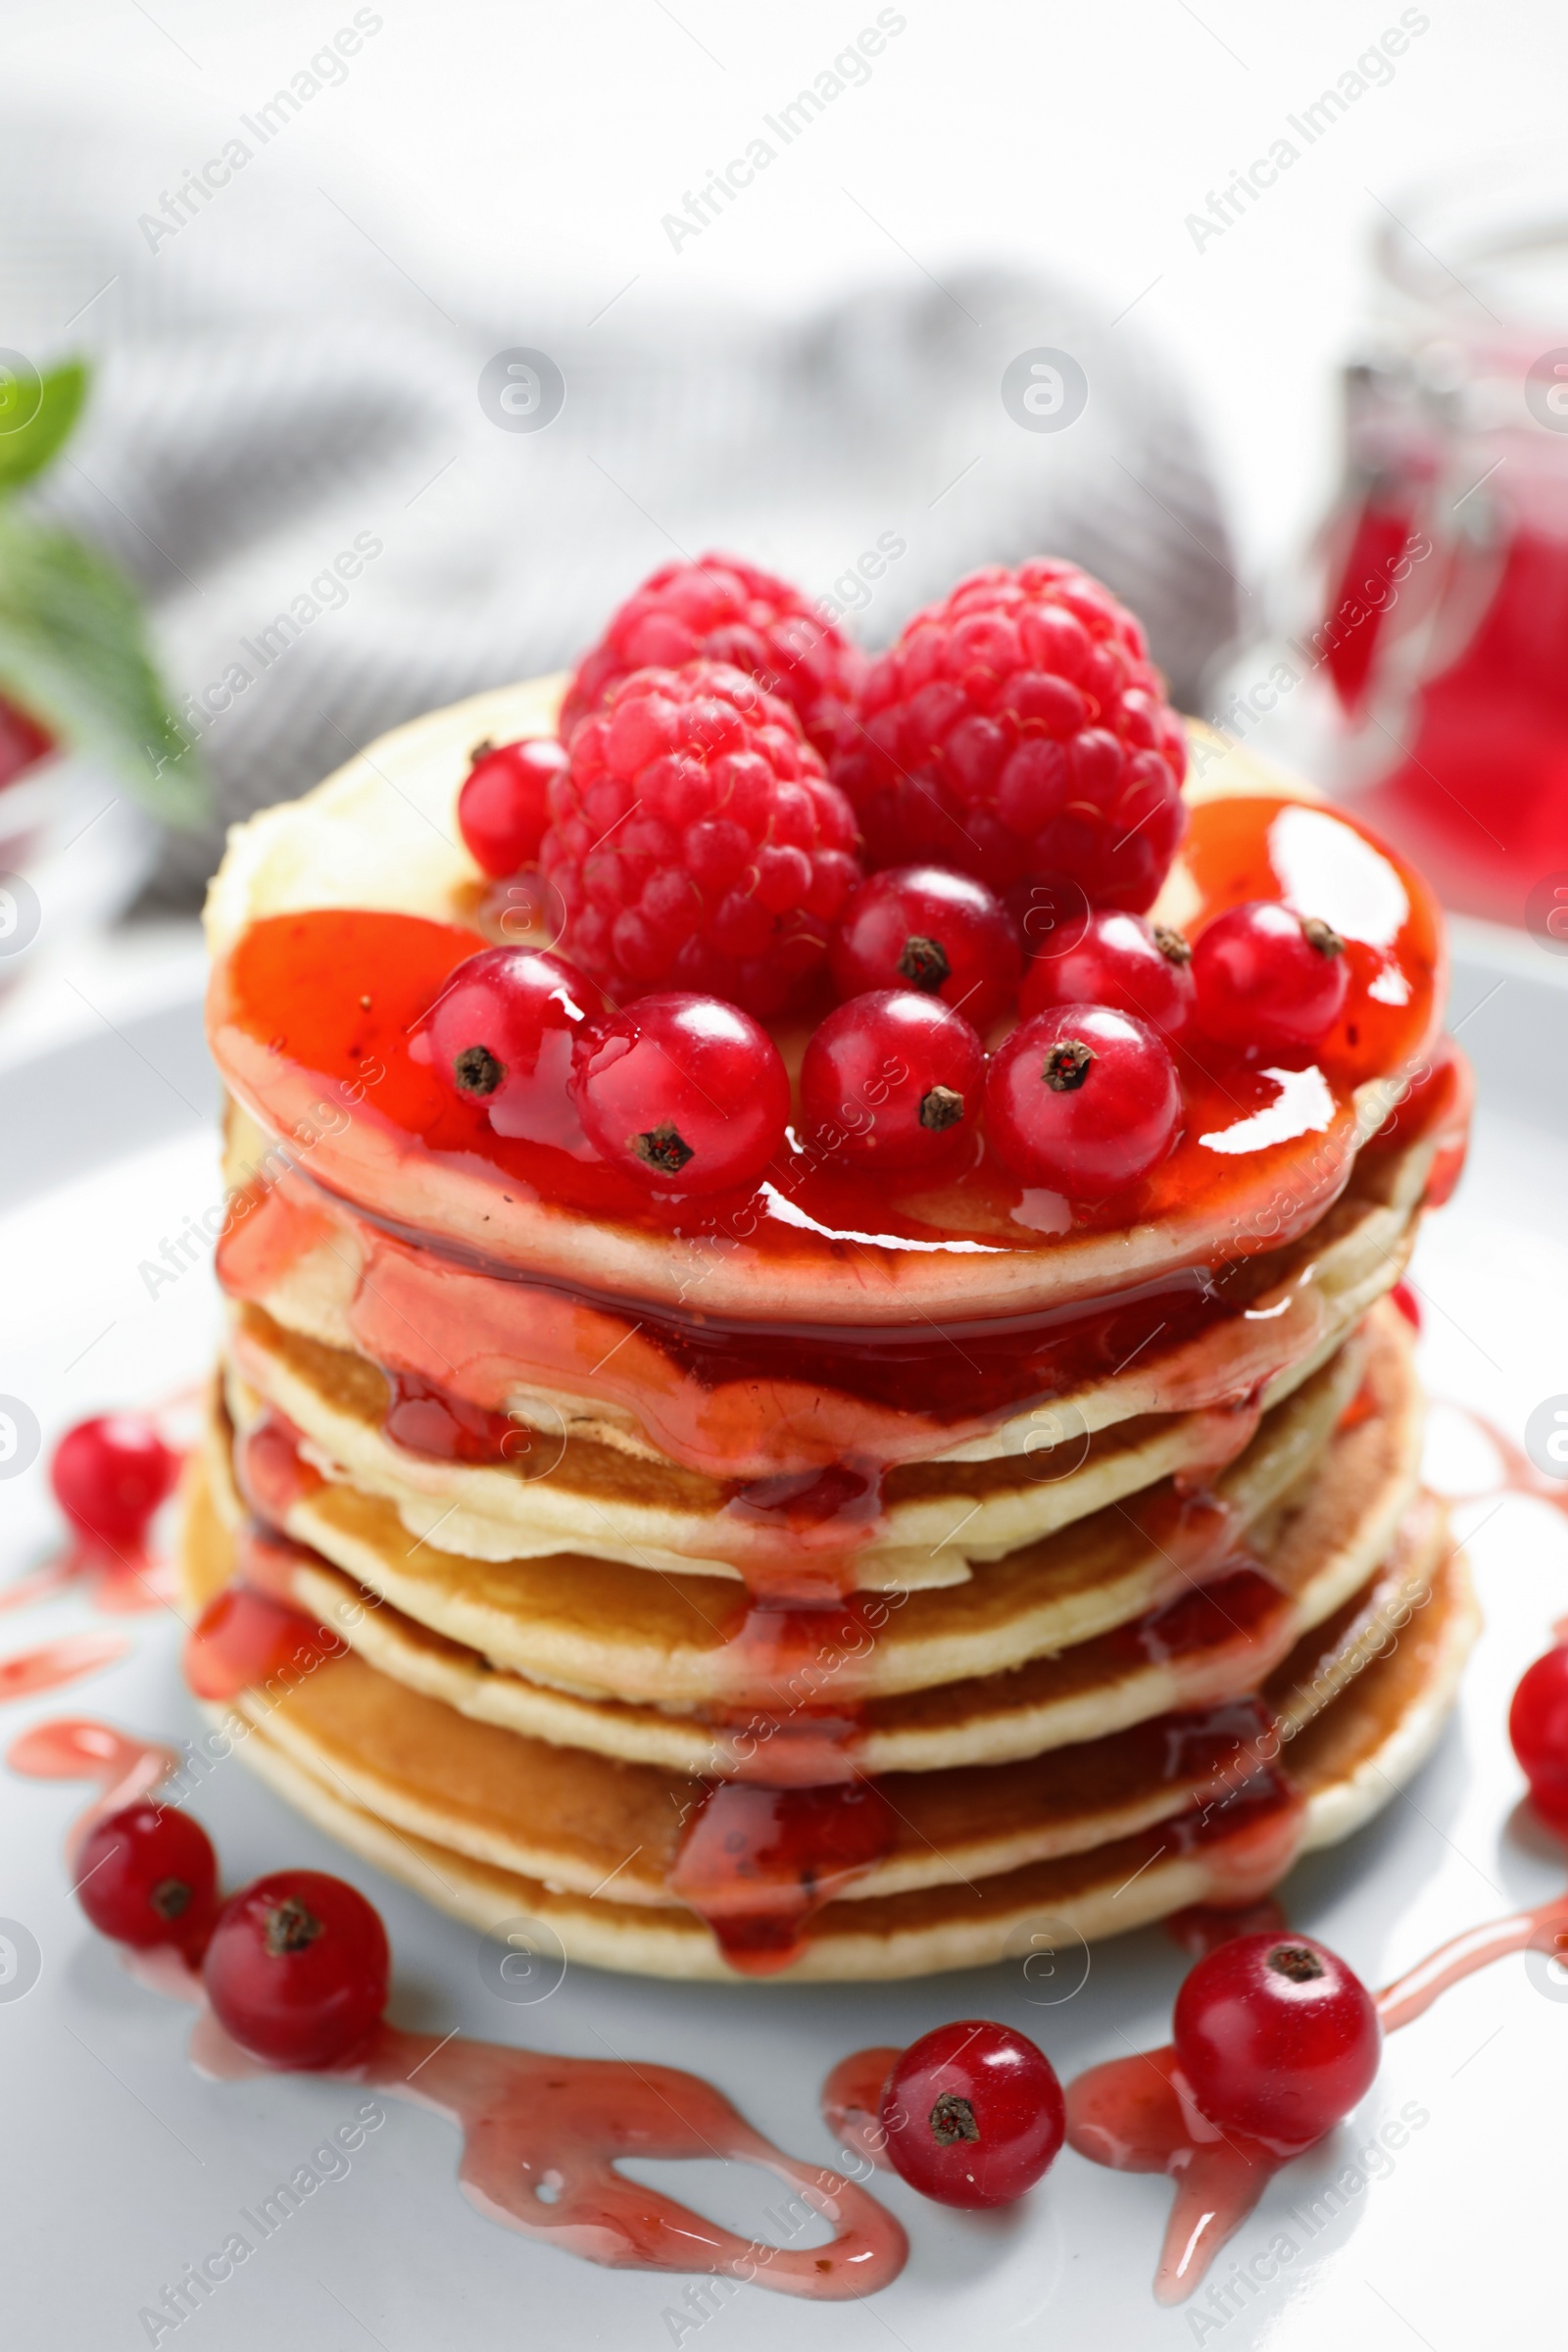 Photo of Delicious pancakes with fresh berries and syrup on plate